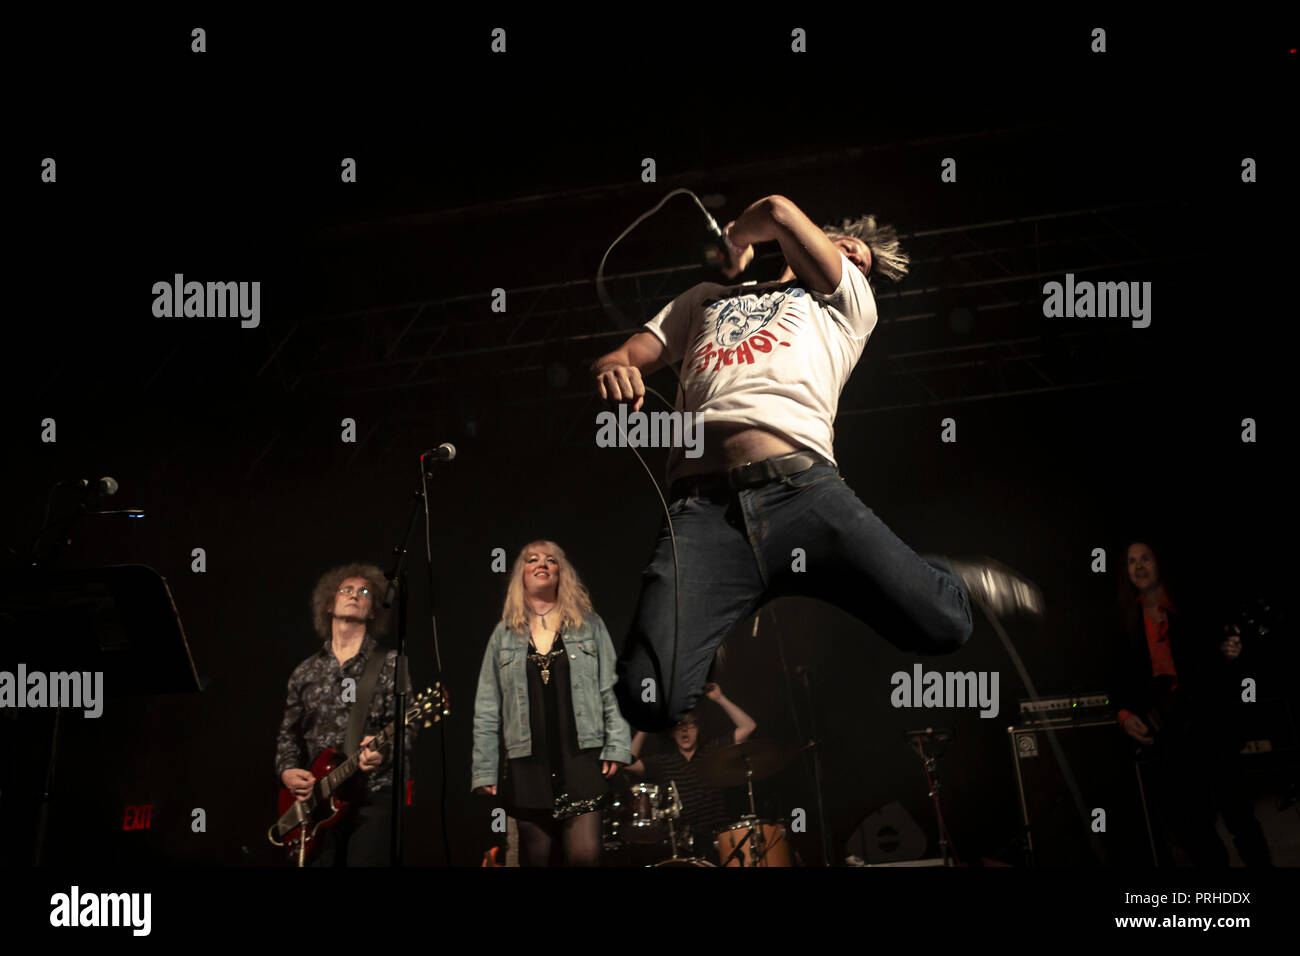 New York City, United States. 28th Sep, 2018. Some of rock best artists performed in Flip These Houses, a concert celebrating protest and political songs. All net proceeds of went to benefit Women's March (Power to the Polls), The Center for Popular Democracy and Rise and Resist. Credit: Michael Nigro/Pacific Press/Alamy Live News Stock Photo